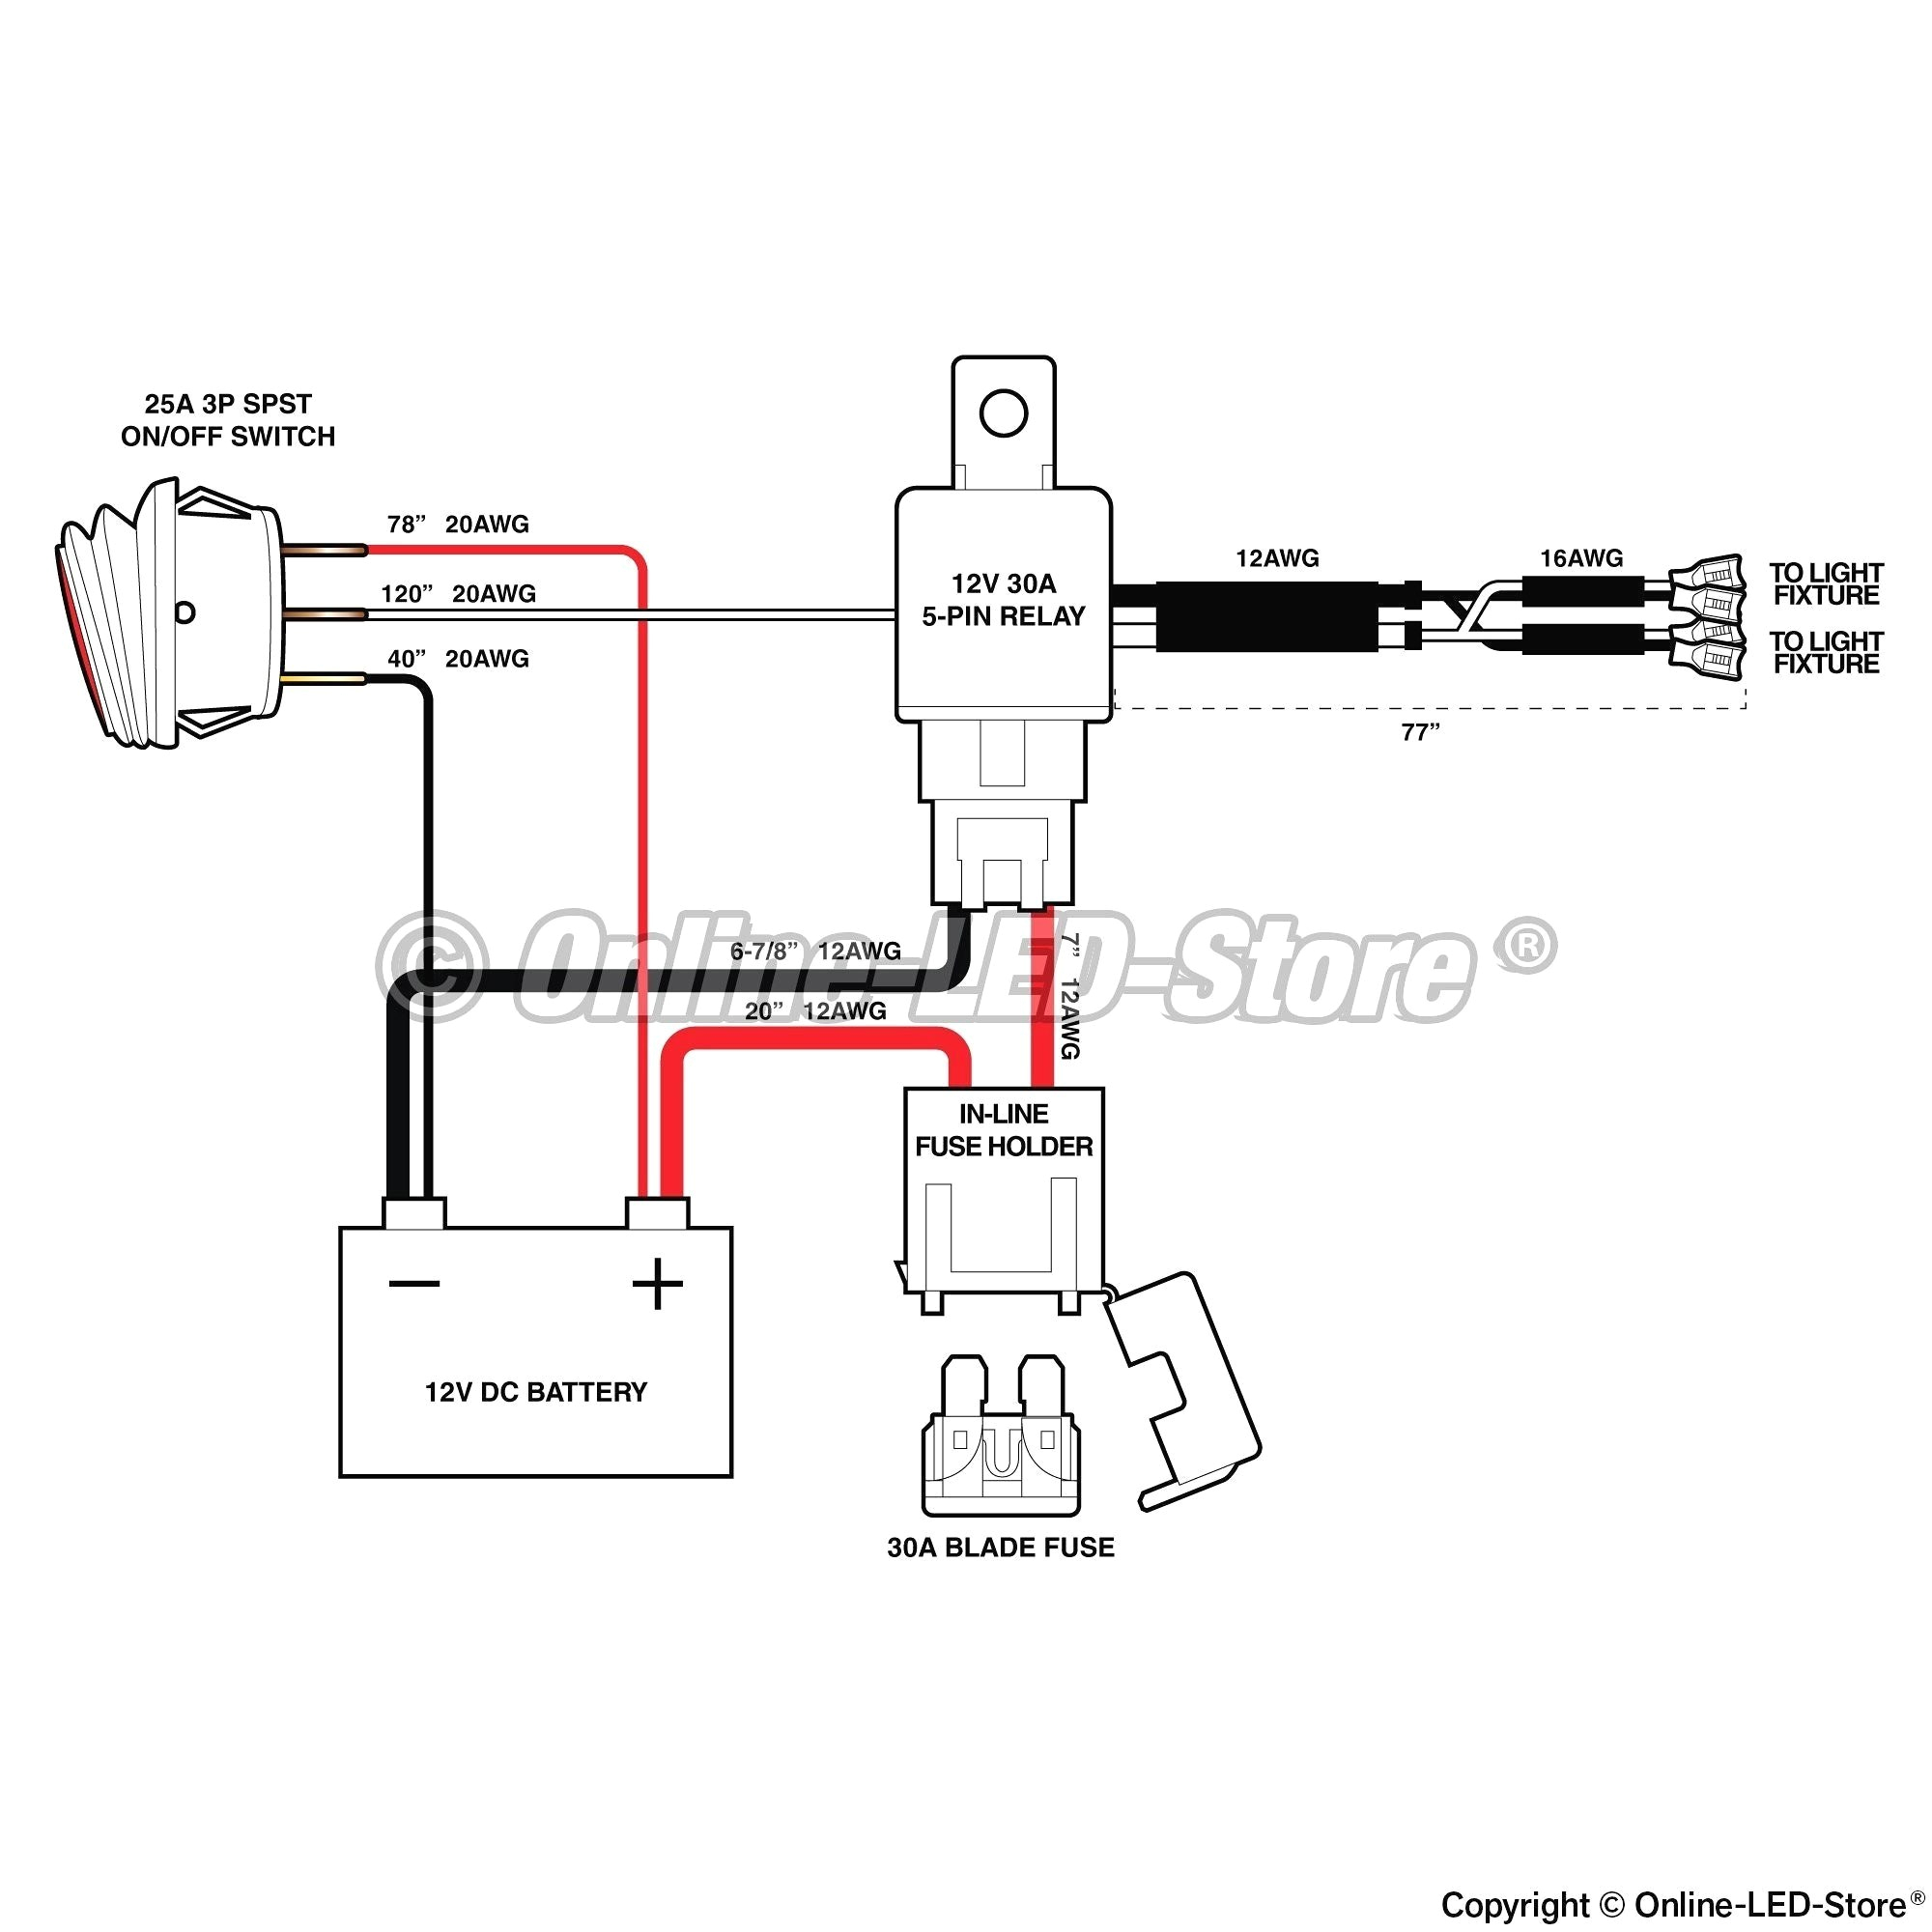 Wiring Diagram for A 4 Pin Relay | autocardesign wiring diagram for equinox 